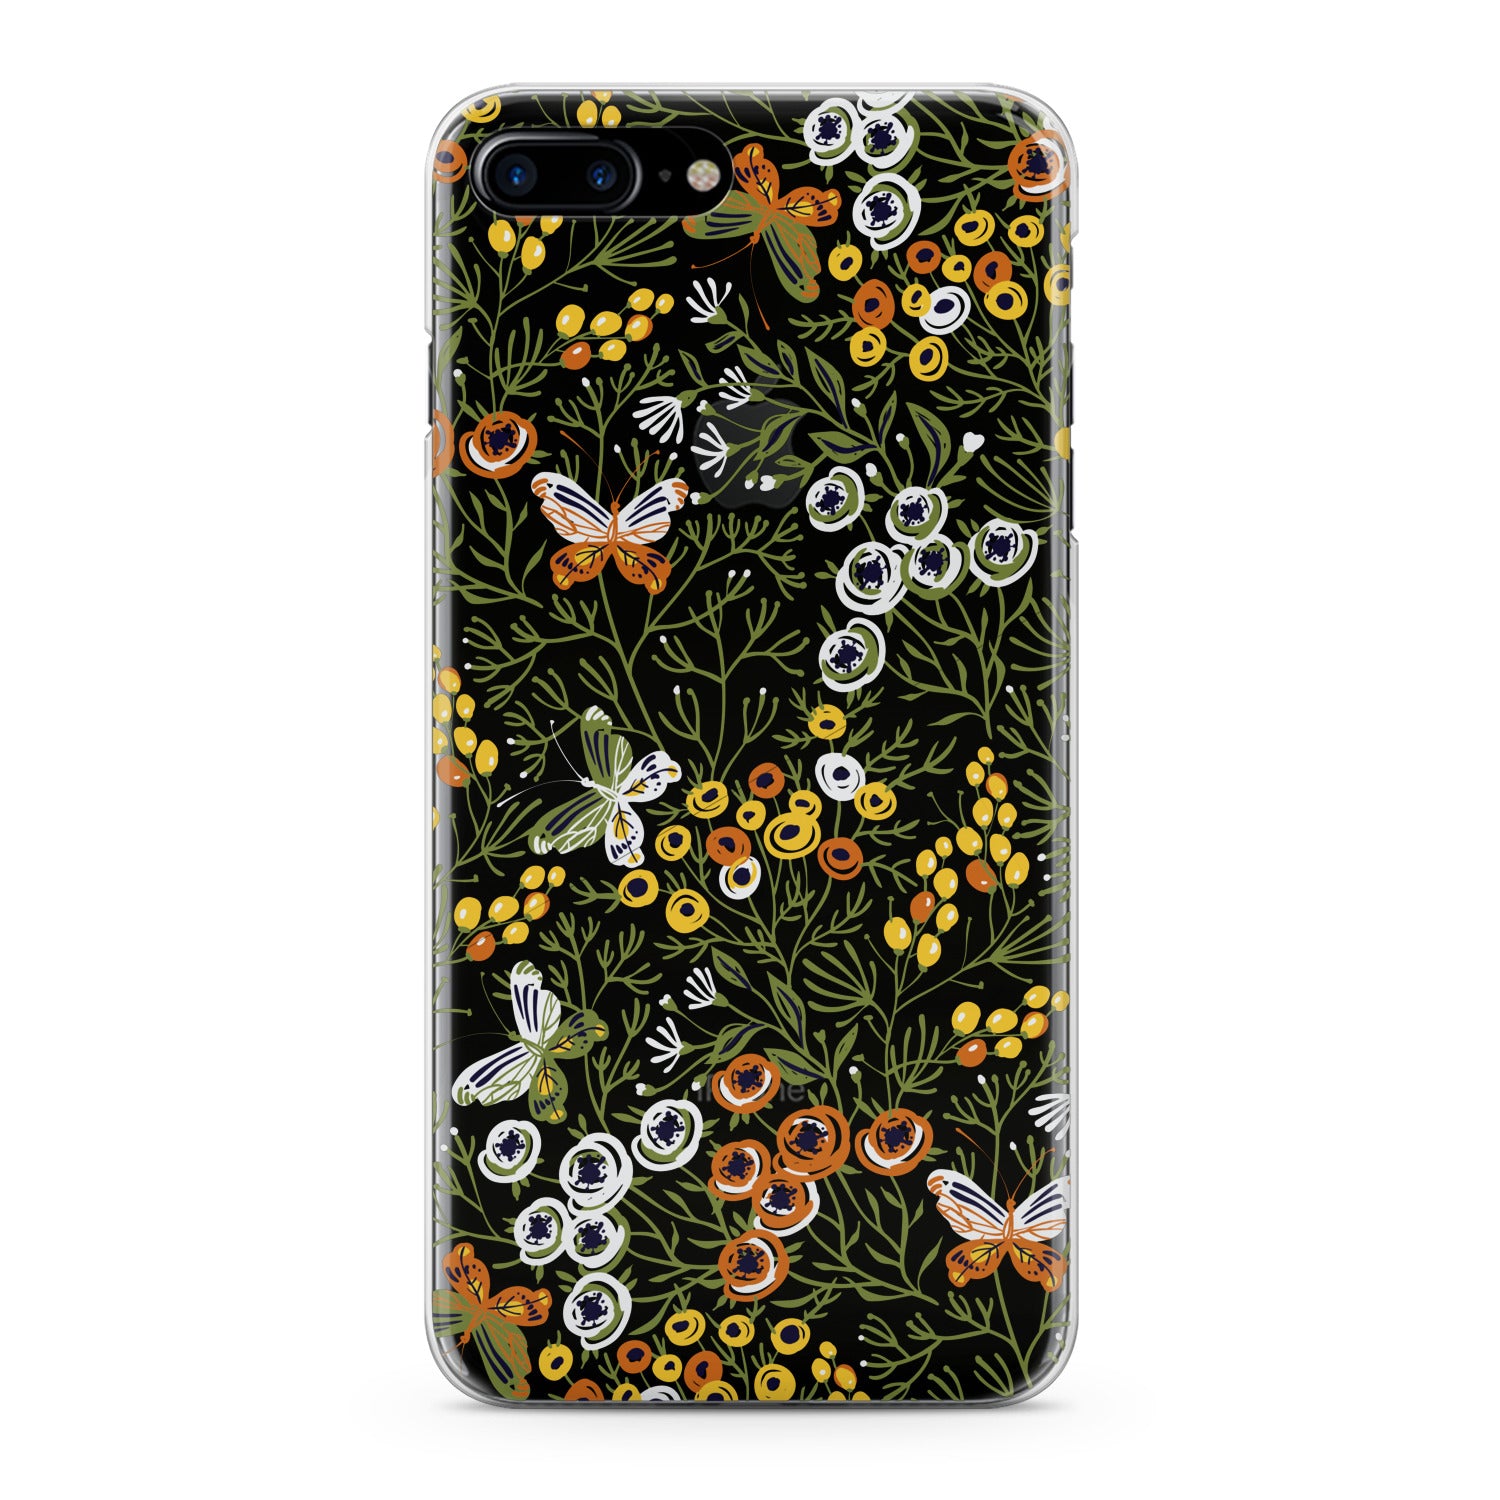 Lex Altern Wild Flowers Phone Case for your iPhone & Android phone.